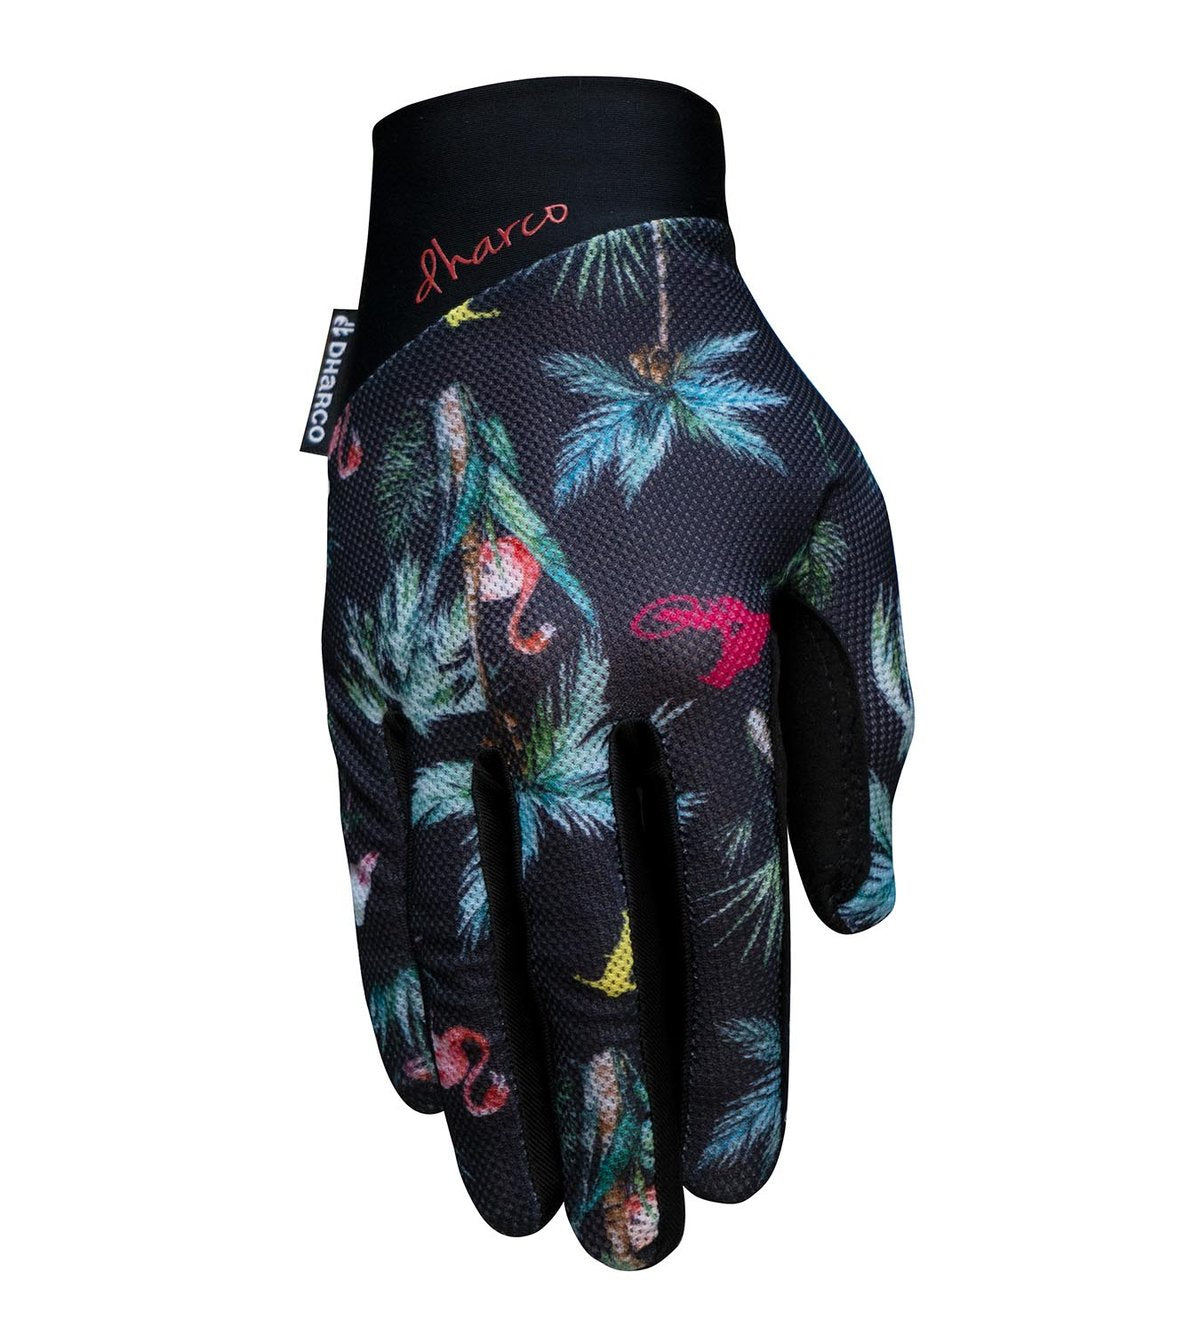 DHaRCO Women's Gloves, 2020 - Cycle Closet